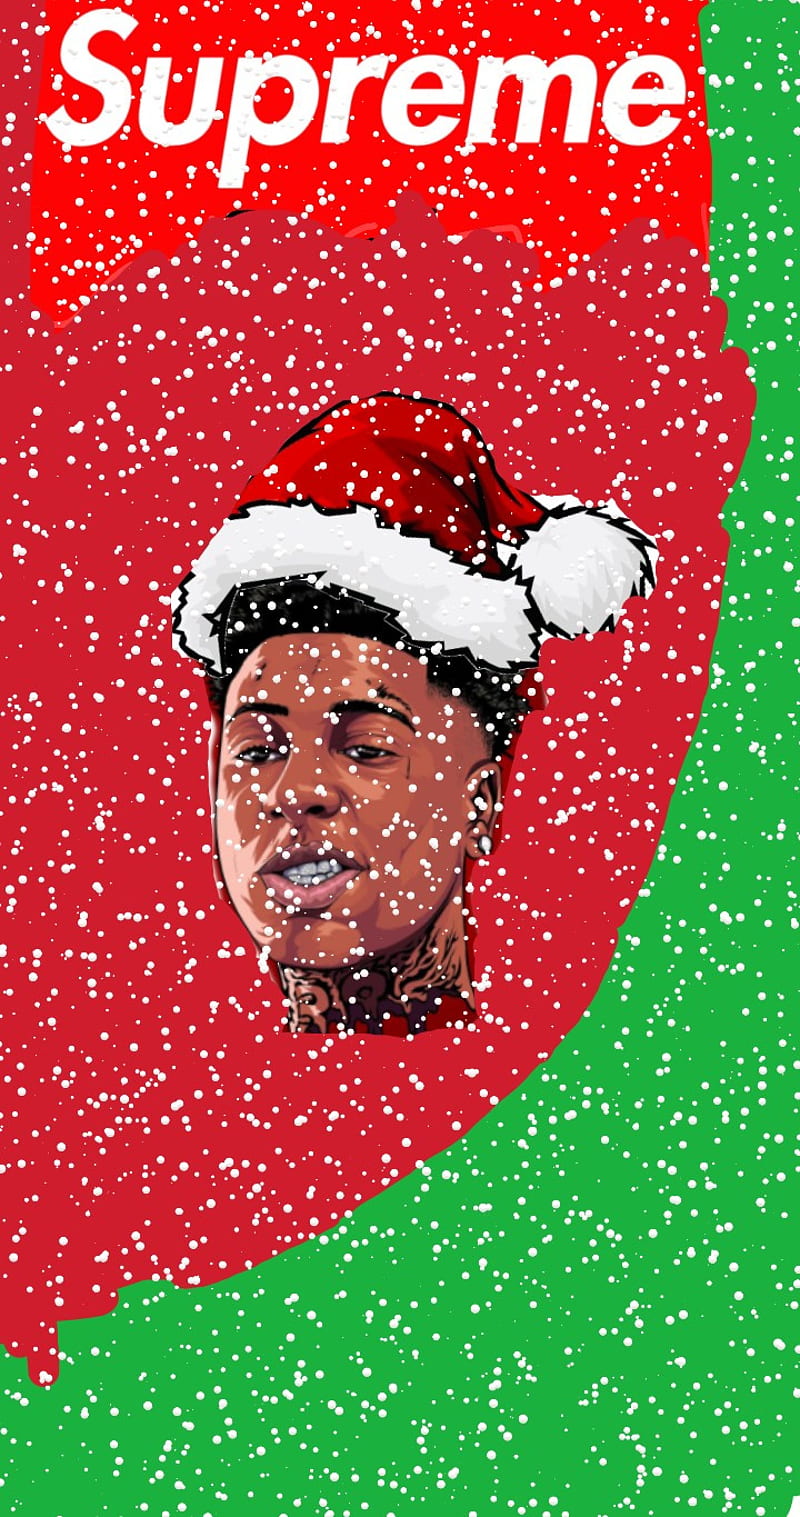 Nba Youngboy Wallpaper  Download to your mobile from PHONEKY